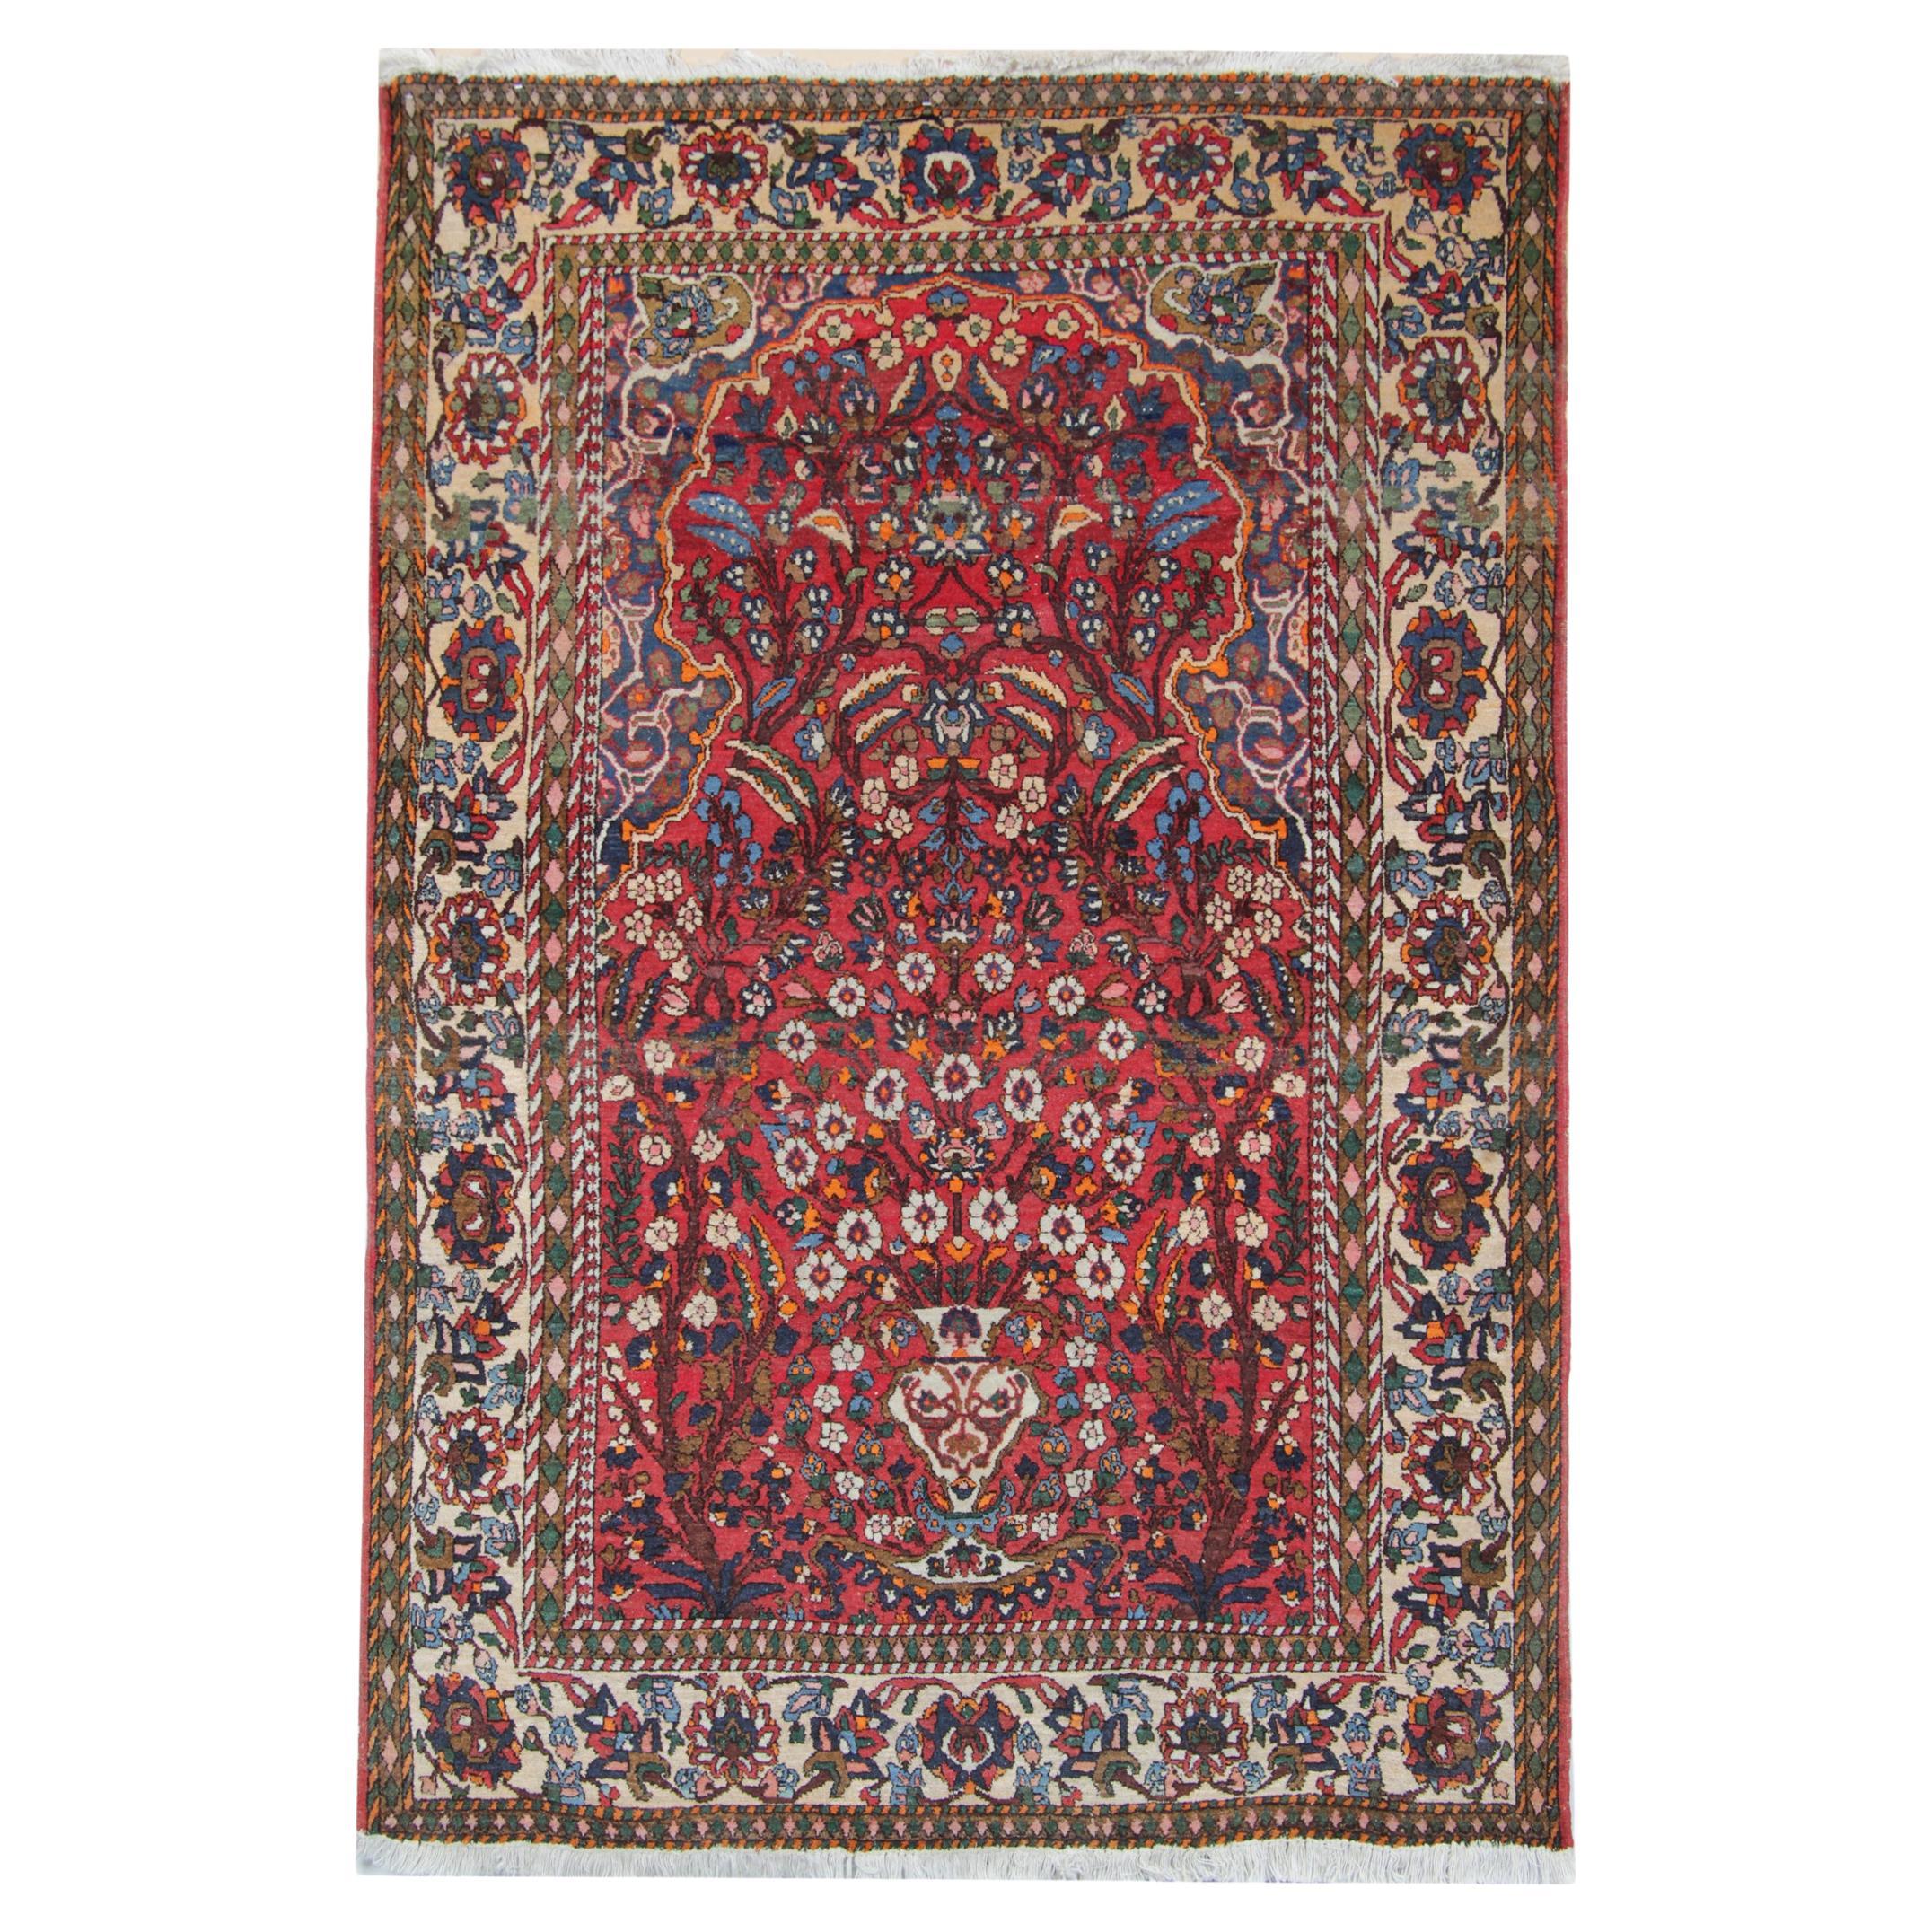 Traditional Red Wool Carpet Handknotted Orienal Antique Area Rug For Sale